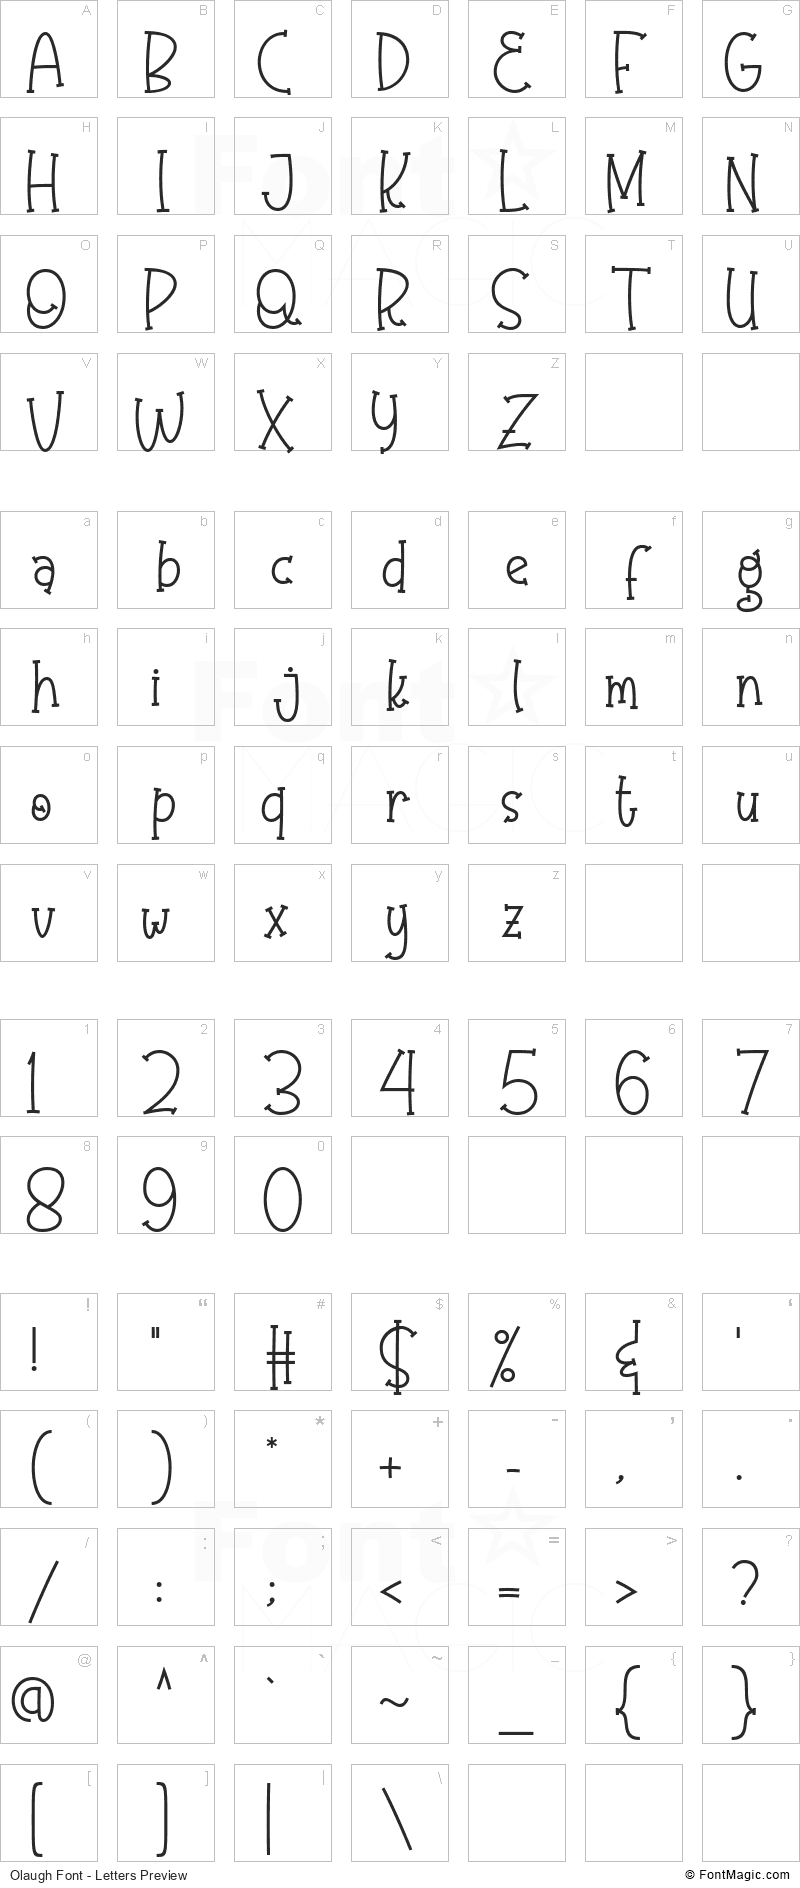 Olaugh Font - All Latters Preview Chart